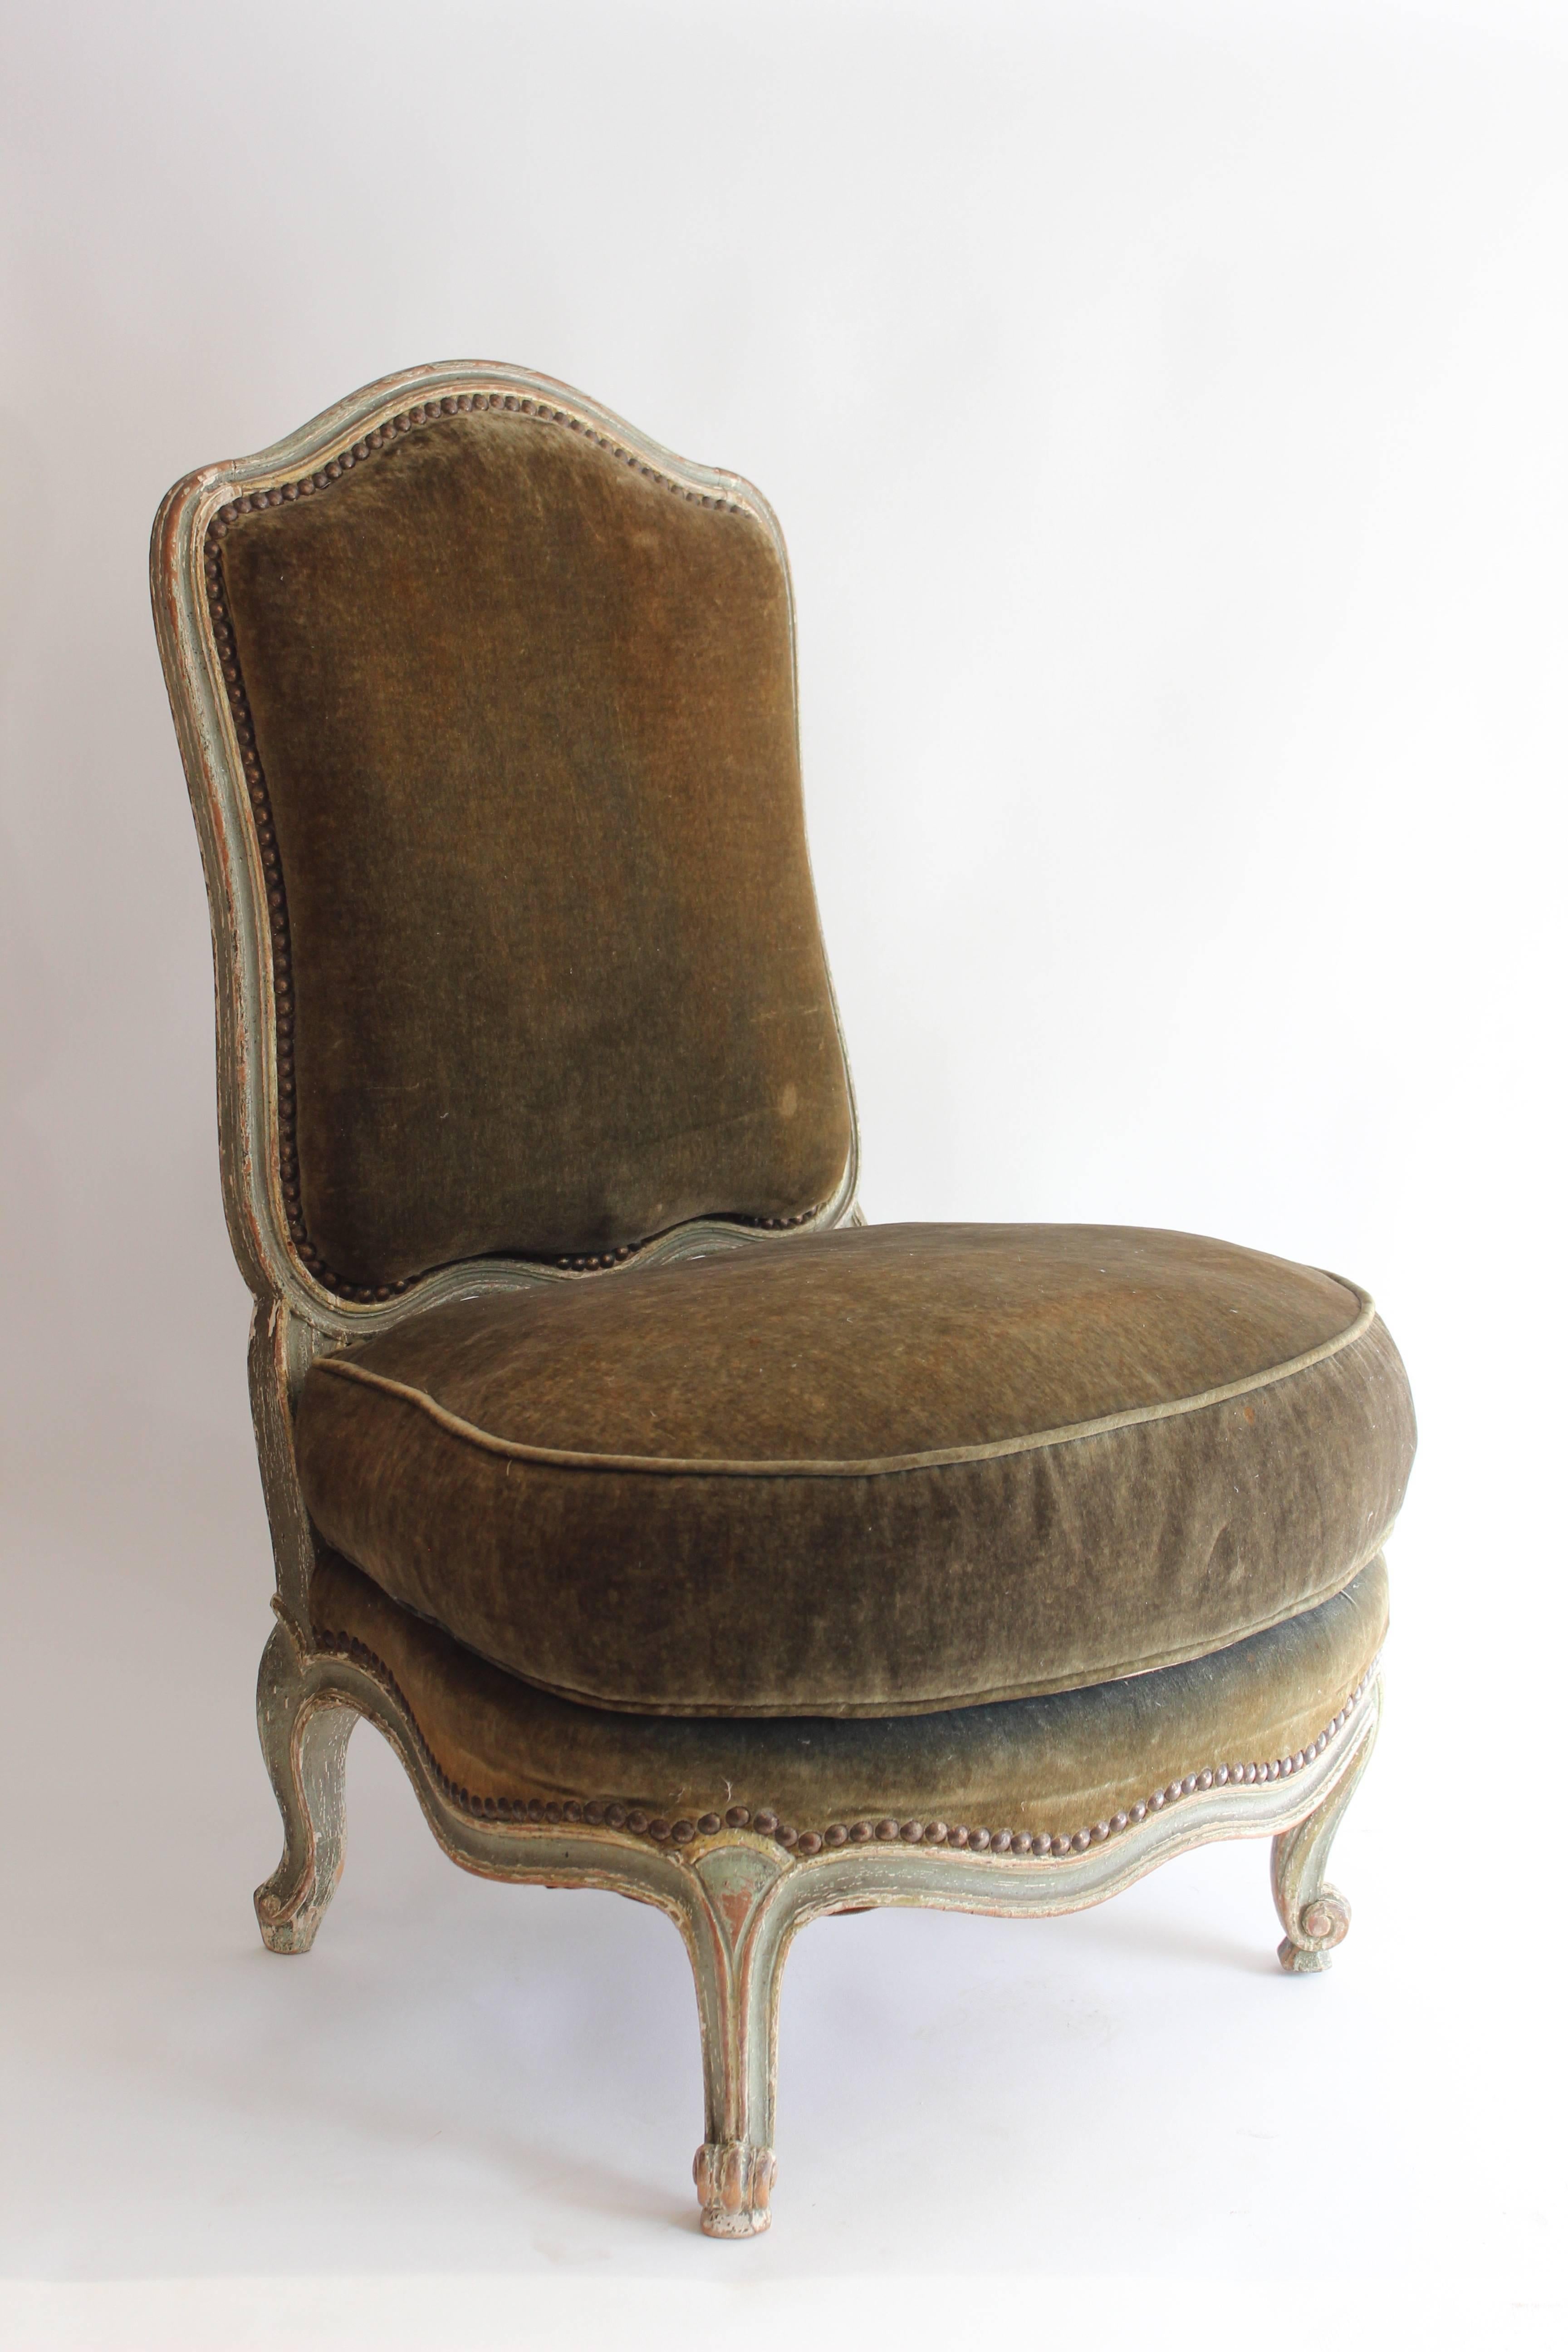 Maison Jansen Louis XV style boudoir chair having arched back over loose cushion seat and with cabriole legs, circa 1920.